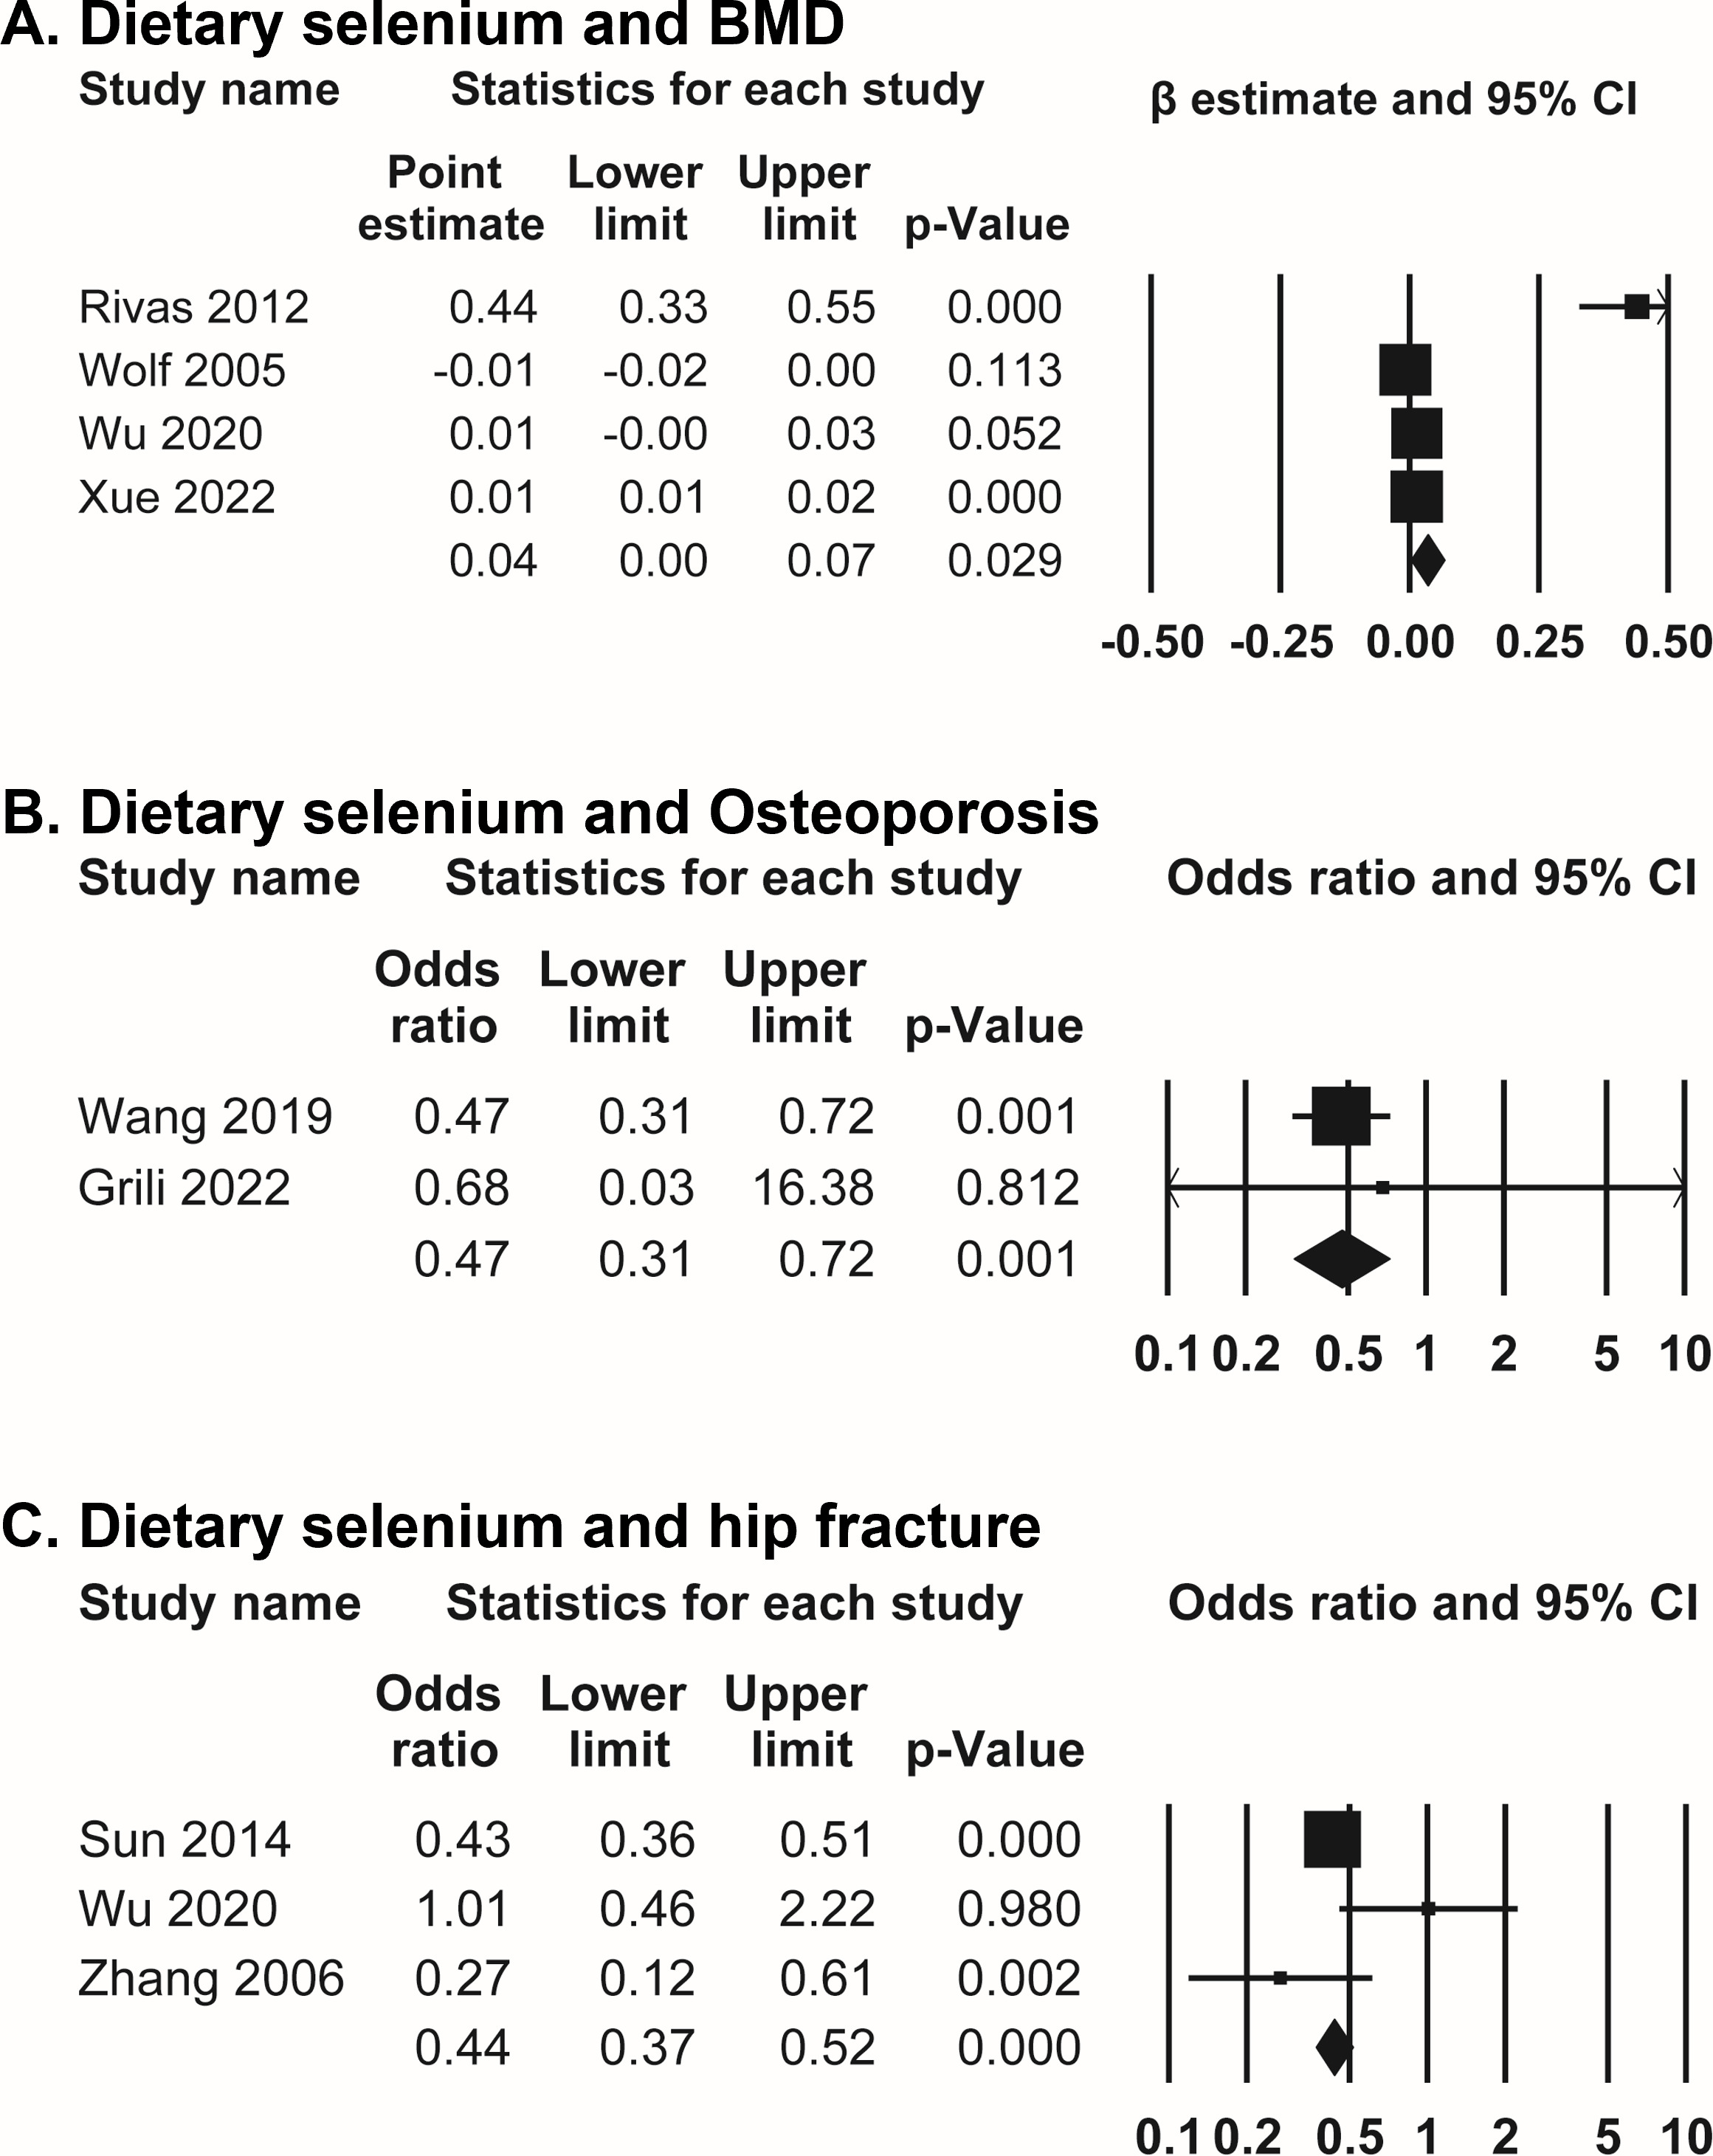 Fig. 2 
            Forest plots of association between dietary selenium and bone health. a) Association between dietary selenium intake and bone mineral density (BMD). b) Association between dietary selenium intake and prevalence of osteoporosis. c) Association between dietary selenium intake and fracture. CI, confidence interval.
          